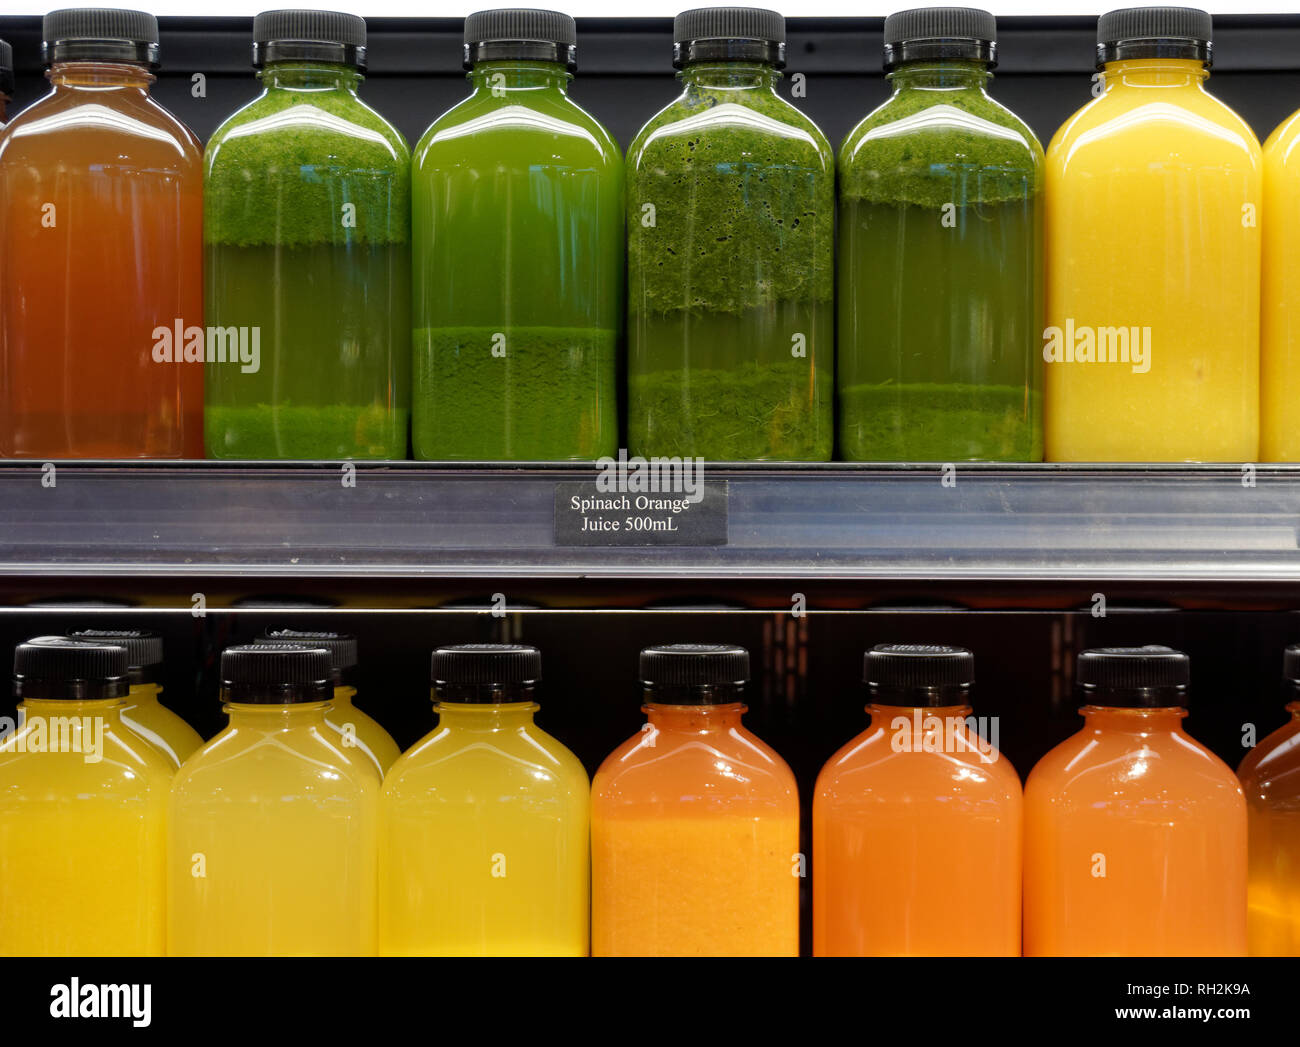 Bottles of freshly squeezed fruit and vegetable juces for sale in a grocery store, Vancouver, BC, Canada Stock Photo